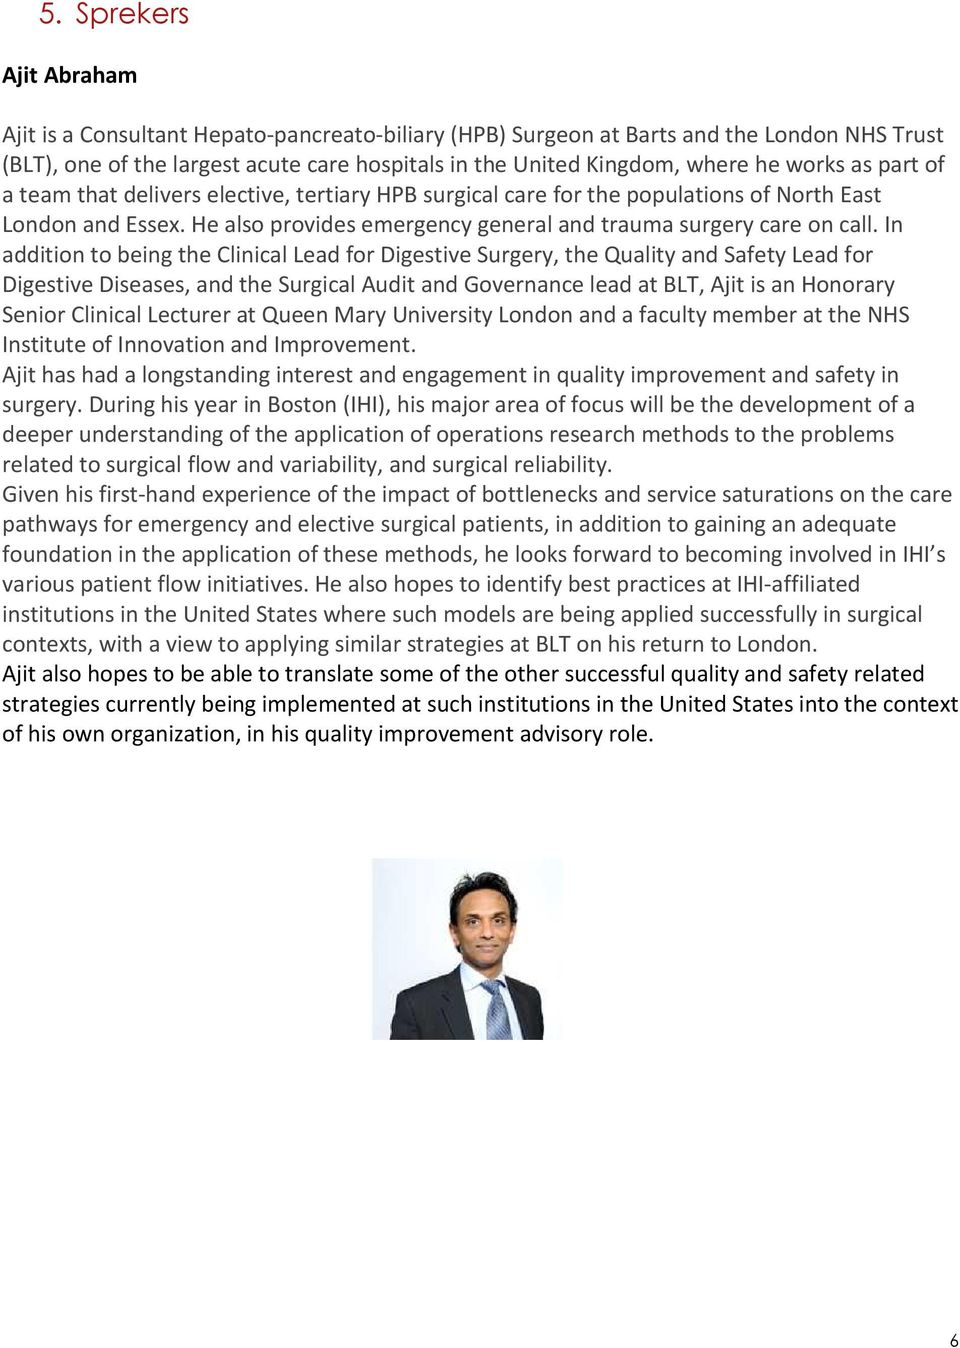 In addition to being the Clinical Lead for Digestive Surgery, the Quality and Safety Lead for Digestive Diseases, and the Surgical Audit and Governance lead at BLT, Ajit is an Honorary Senior